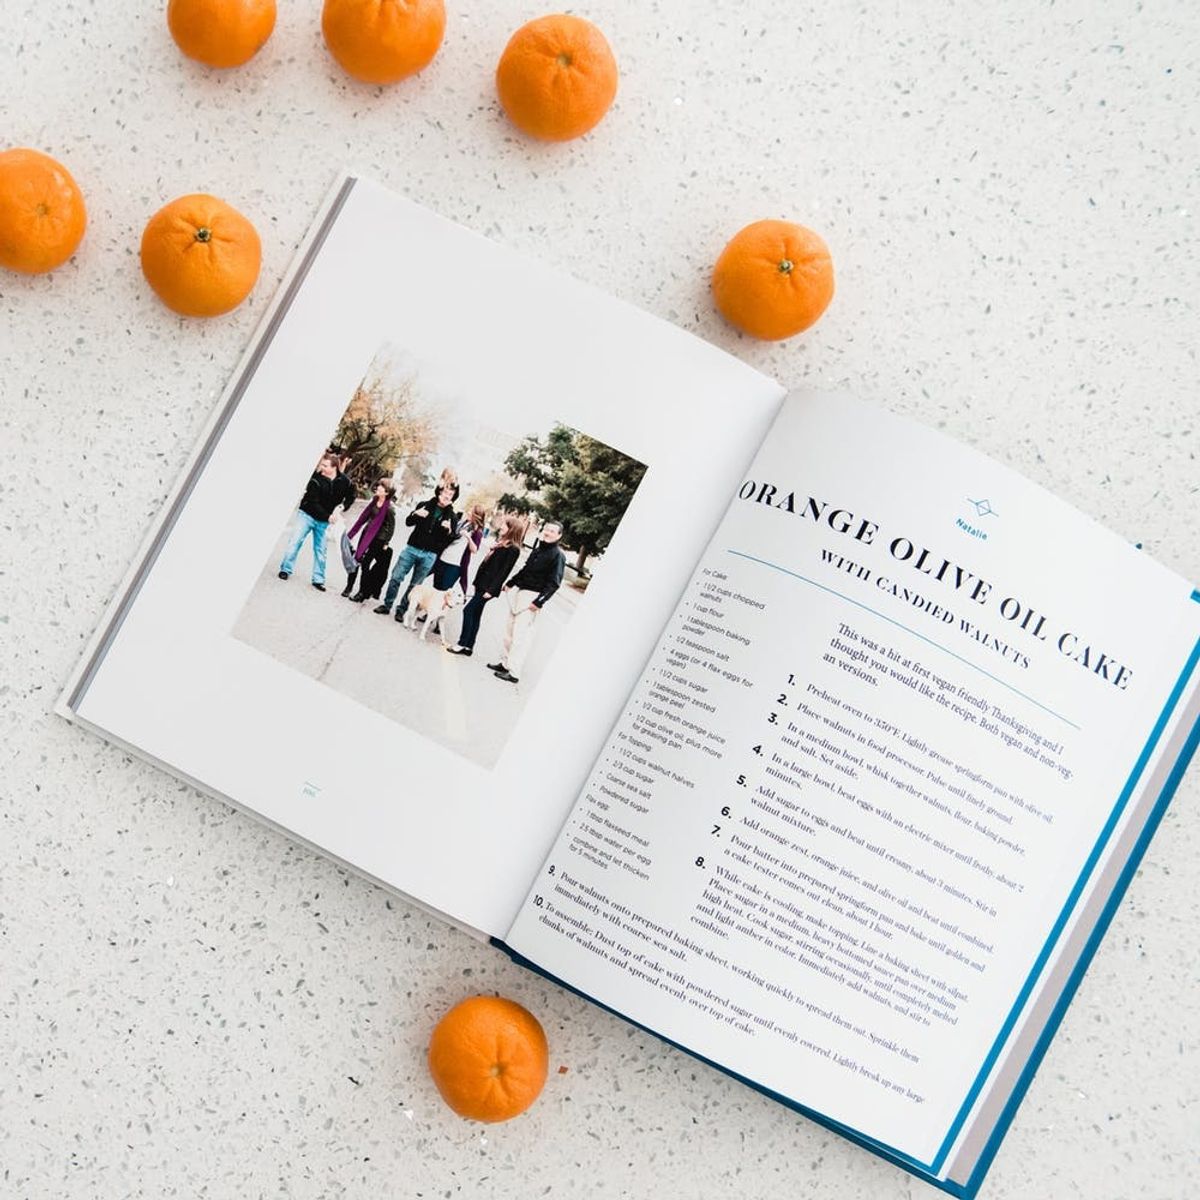 This Personalized Cookbook Is the Wedding Gift Every Foodie Couple Needs